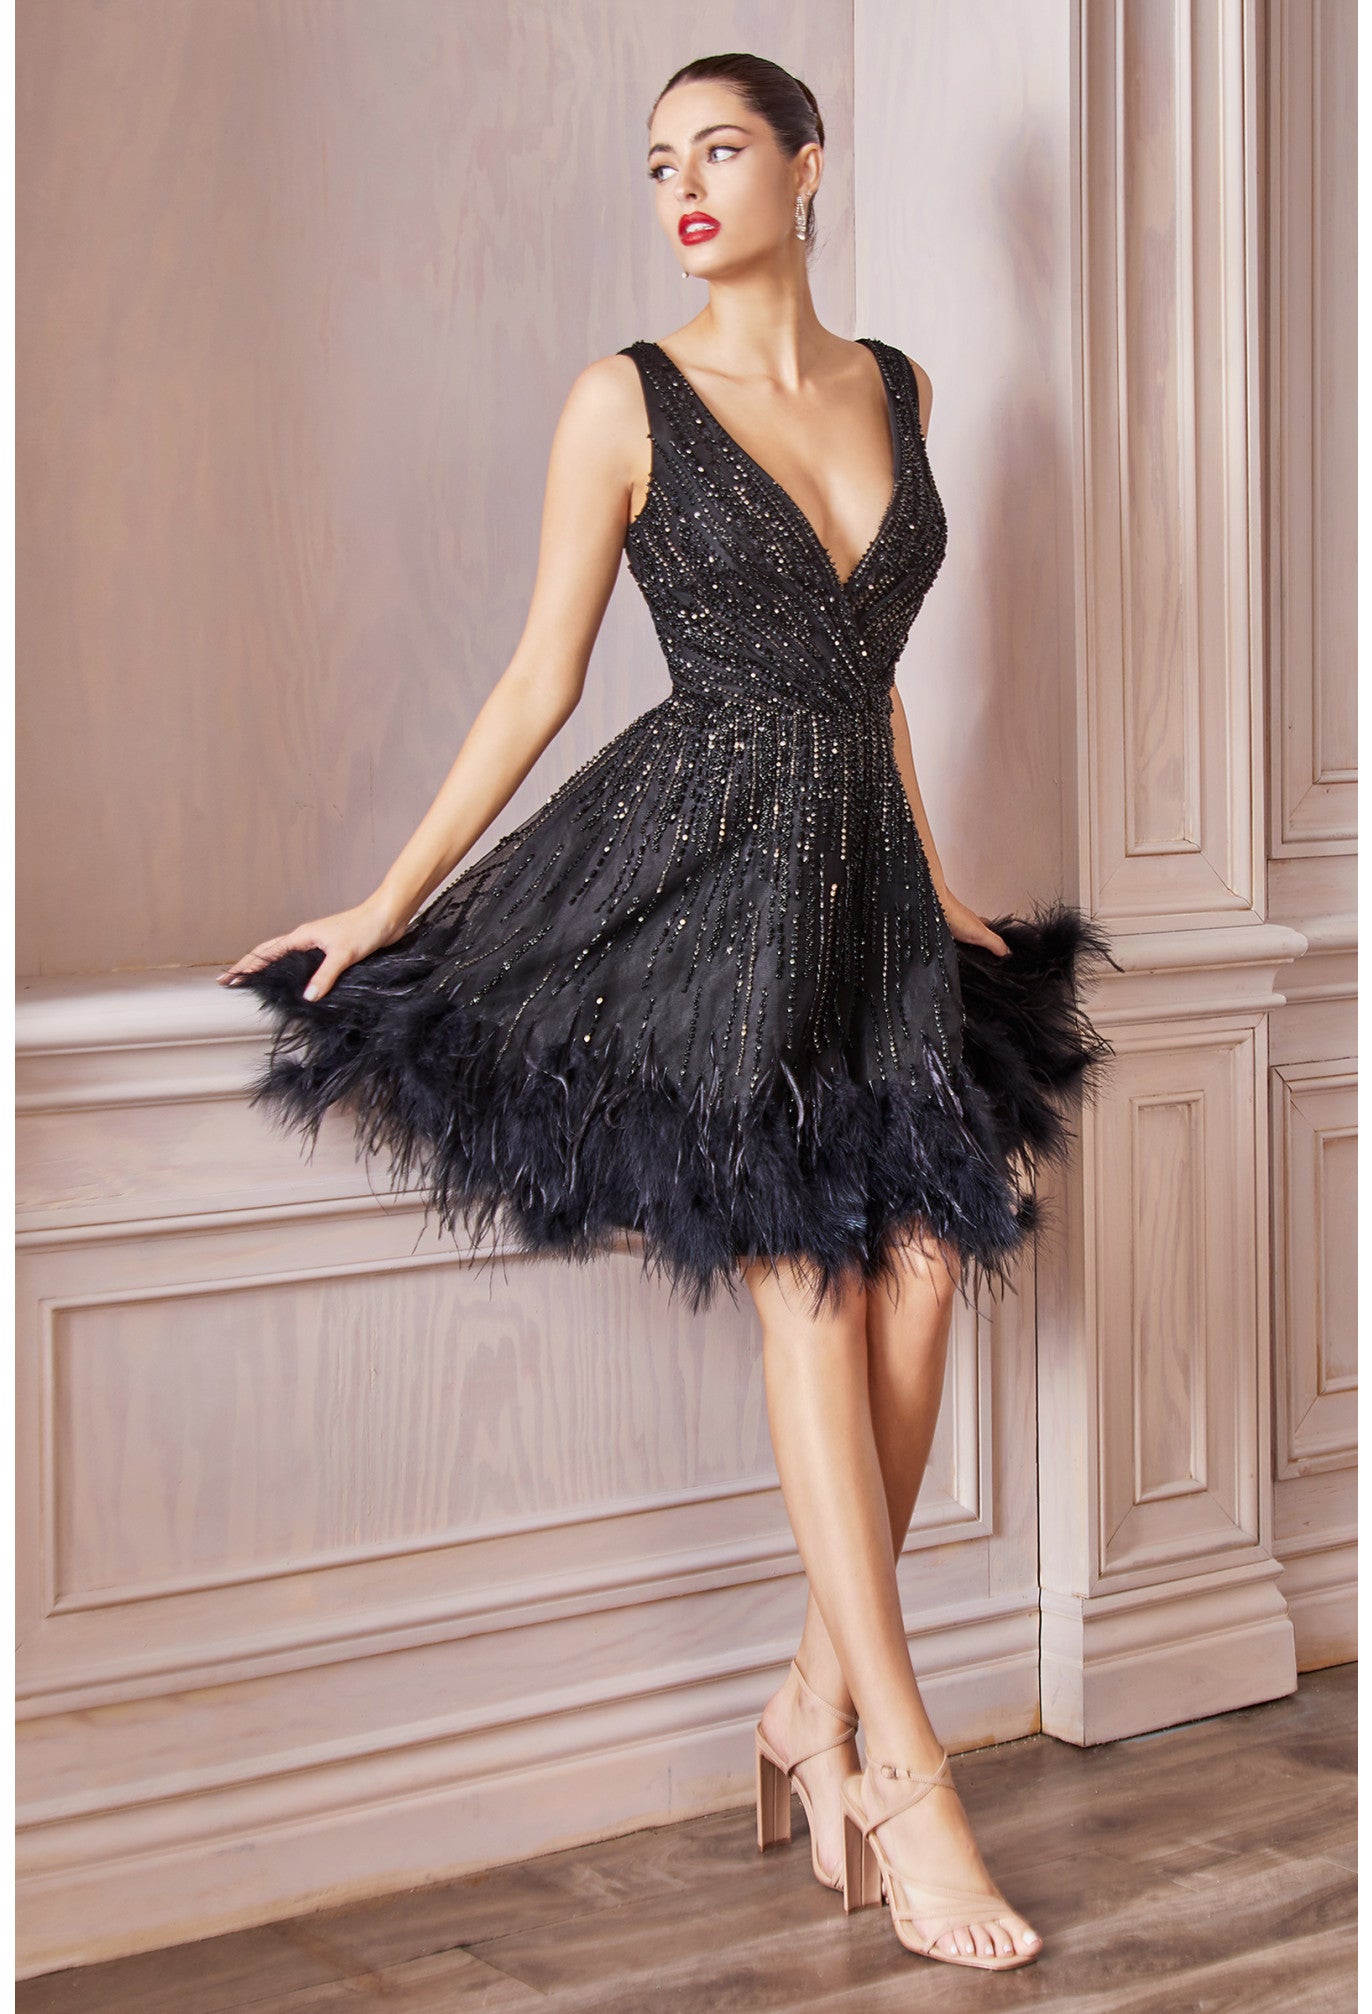 Jeweled Feathered glitter A-line Short Cocktail Dress by Andrea & Leo Couture - A1012 Wren Dress - Short